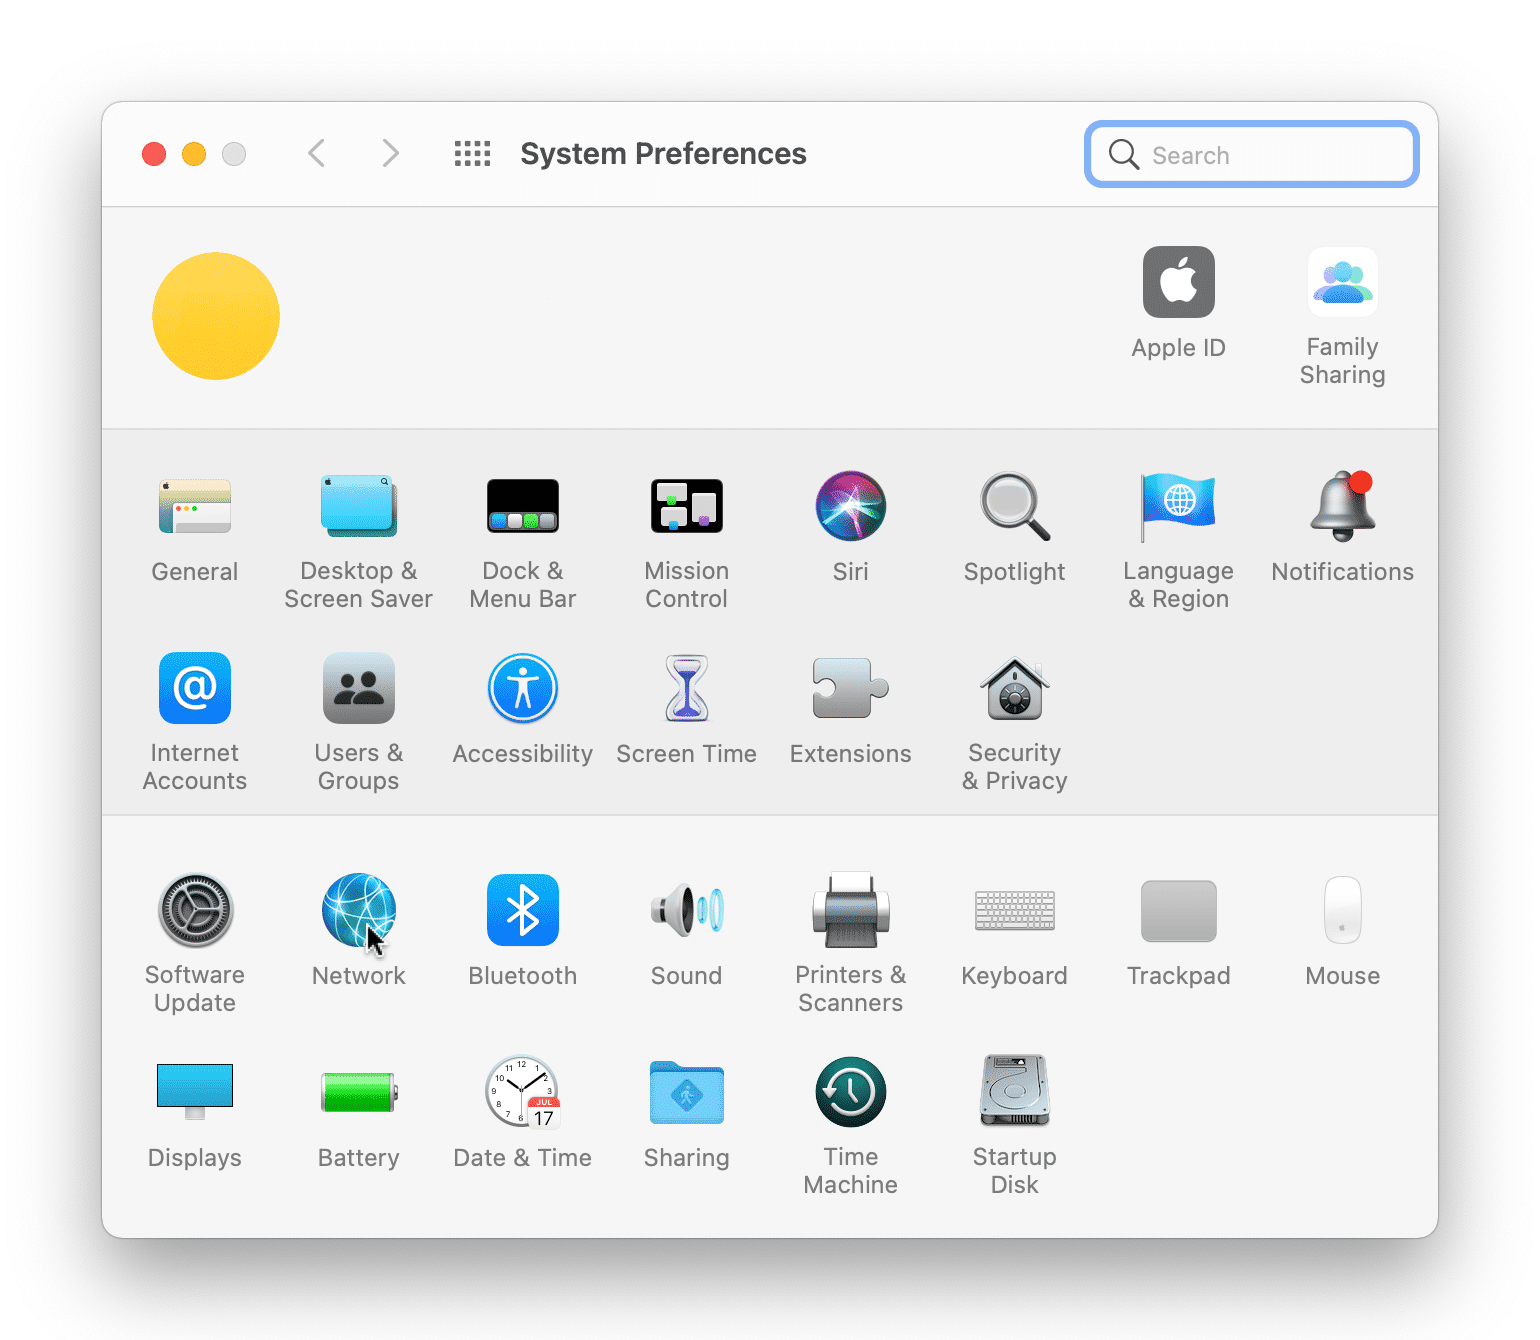 The System Preferences menu on MacOS